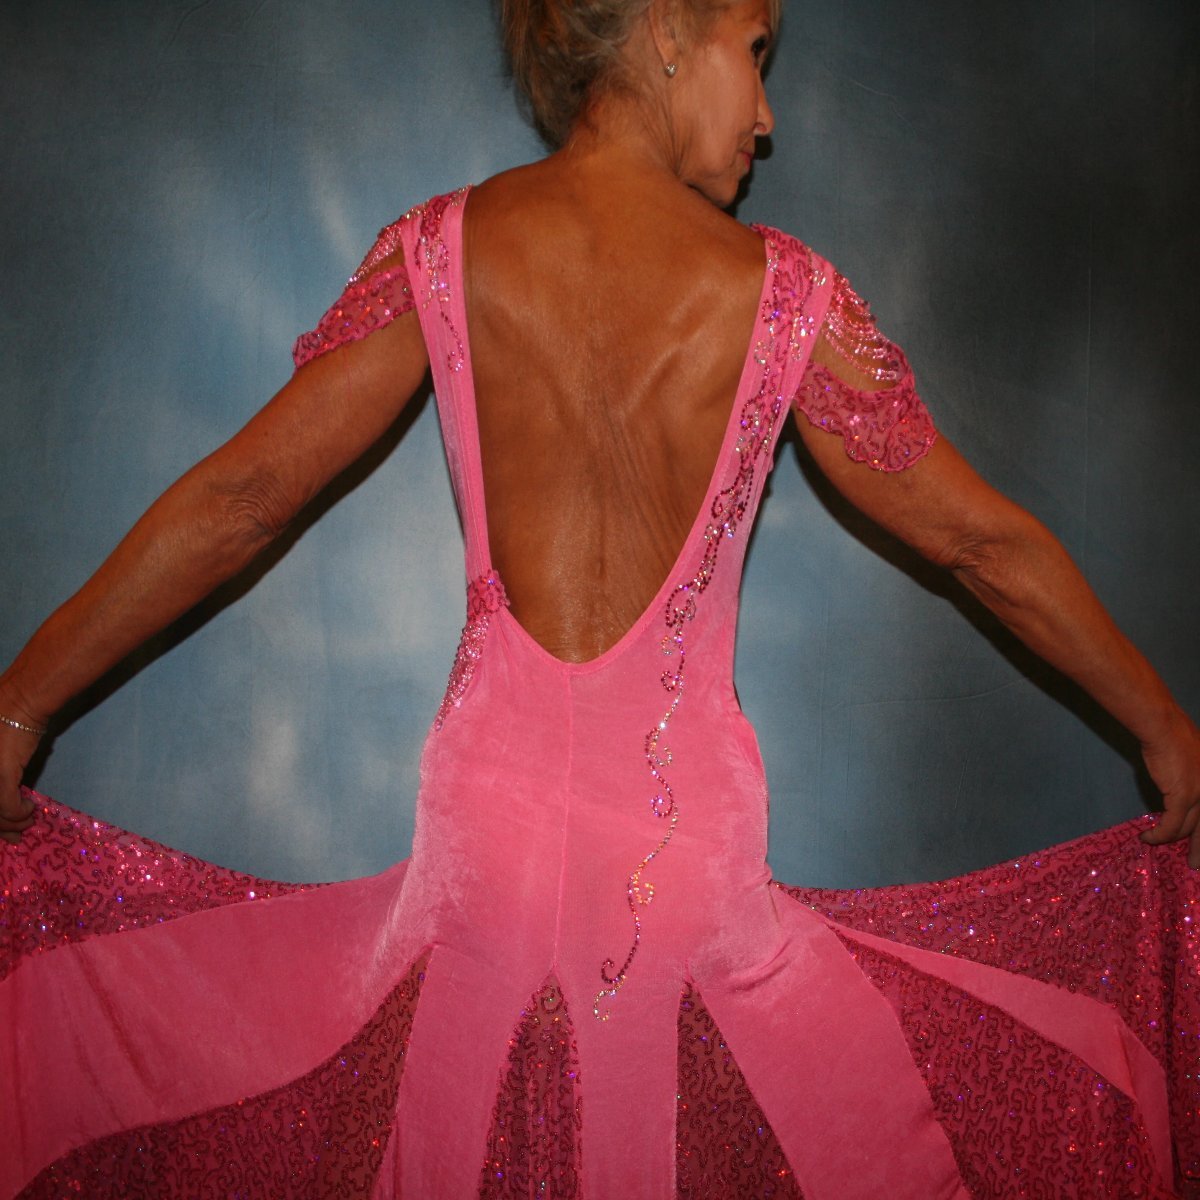 Crystal's Creations close up back view of Pink ballroom dress was created of luxurious bubble gum pink solid slinky with yards & yards of delicate deep pink sequin insets & is embellished with CAB & rose Swarovski detailed rhinestone work